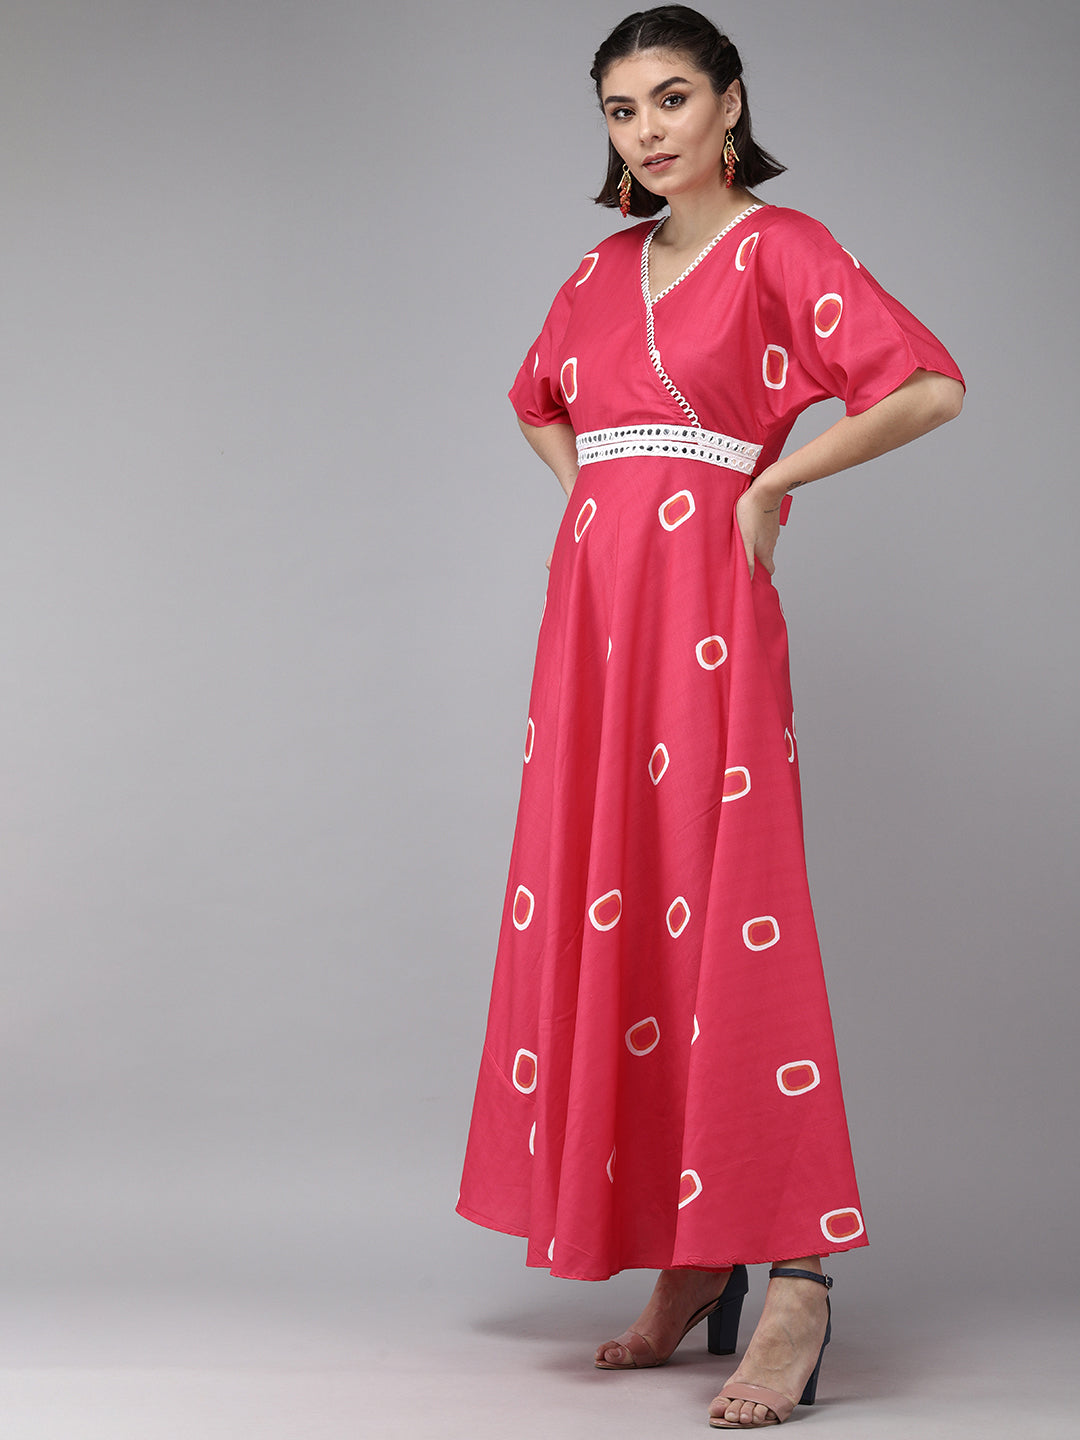 Women's Pink Floral Print Maxi Dress - Bhama Couture